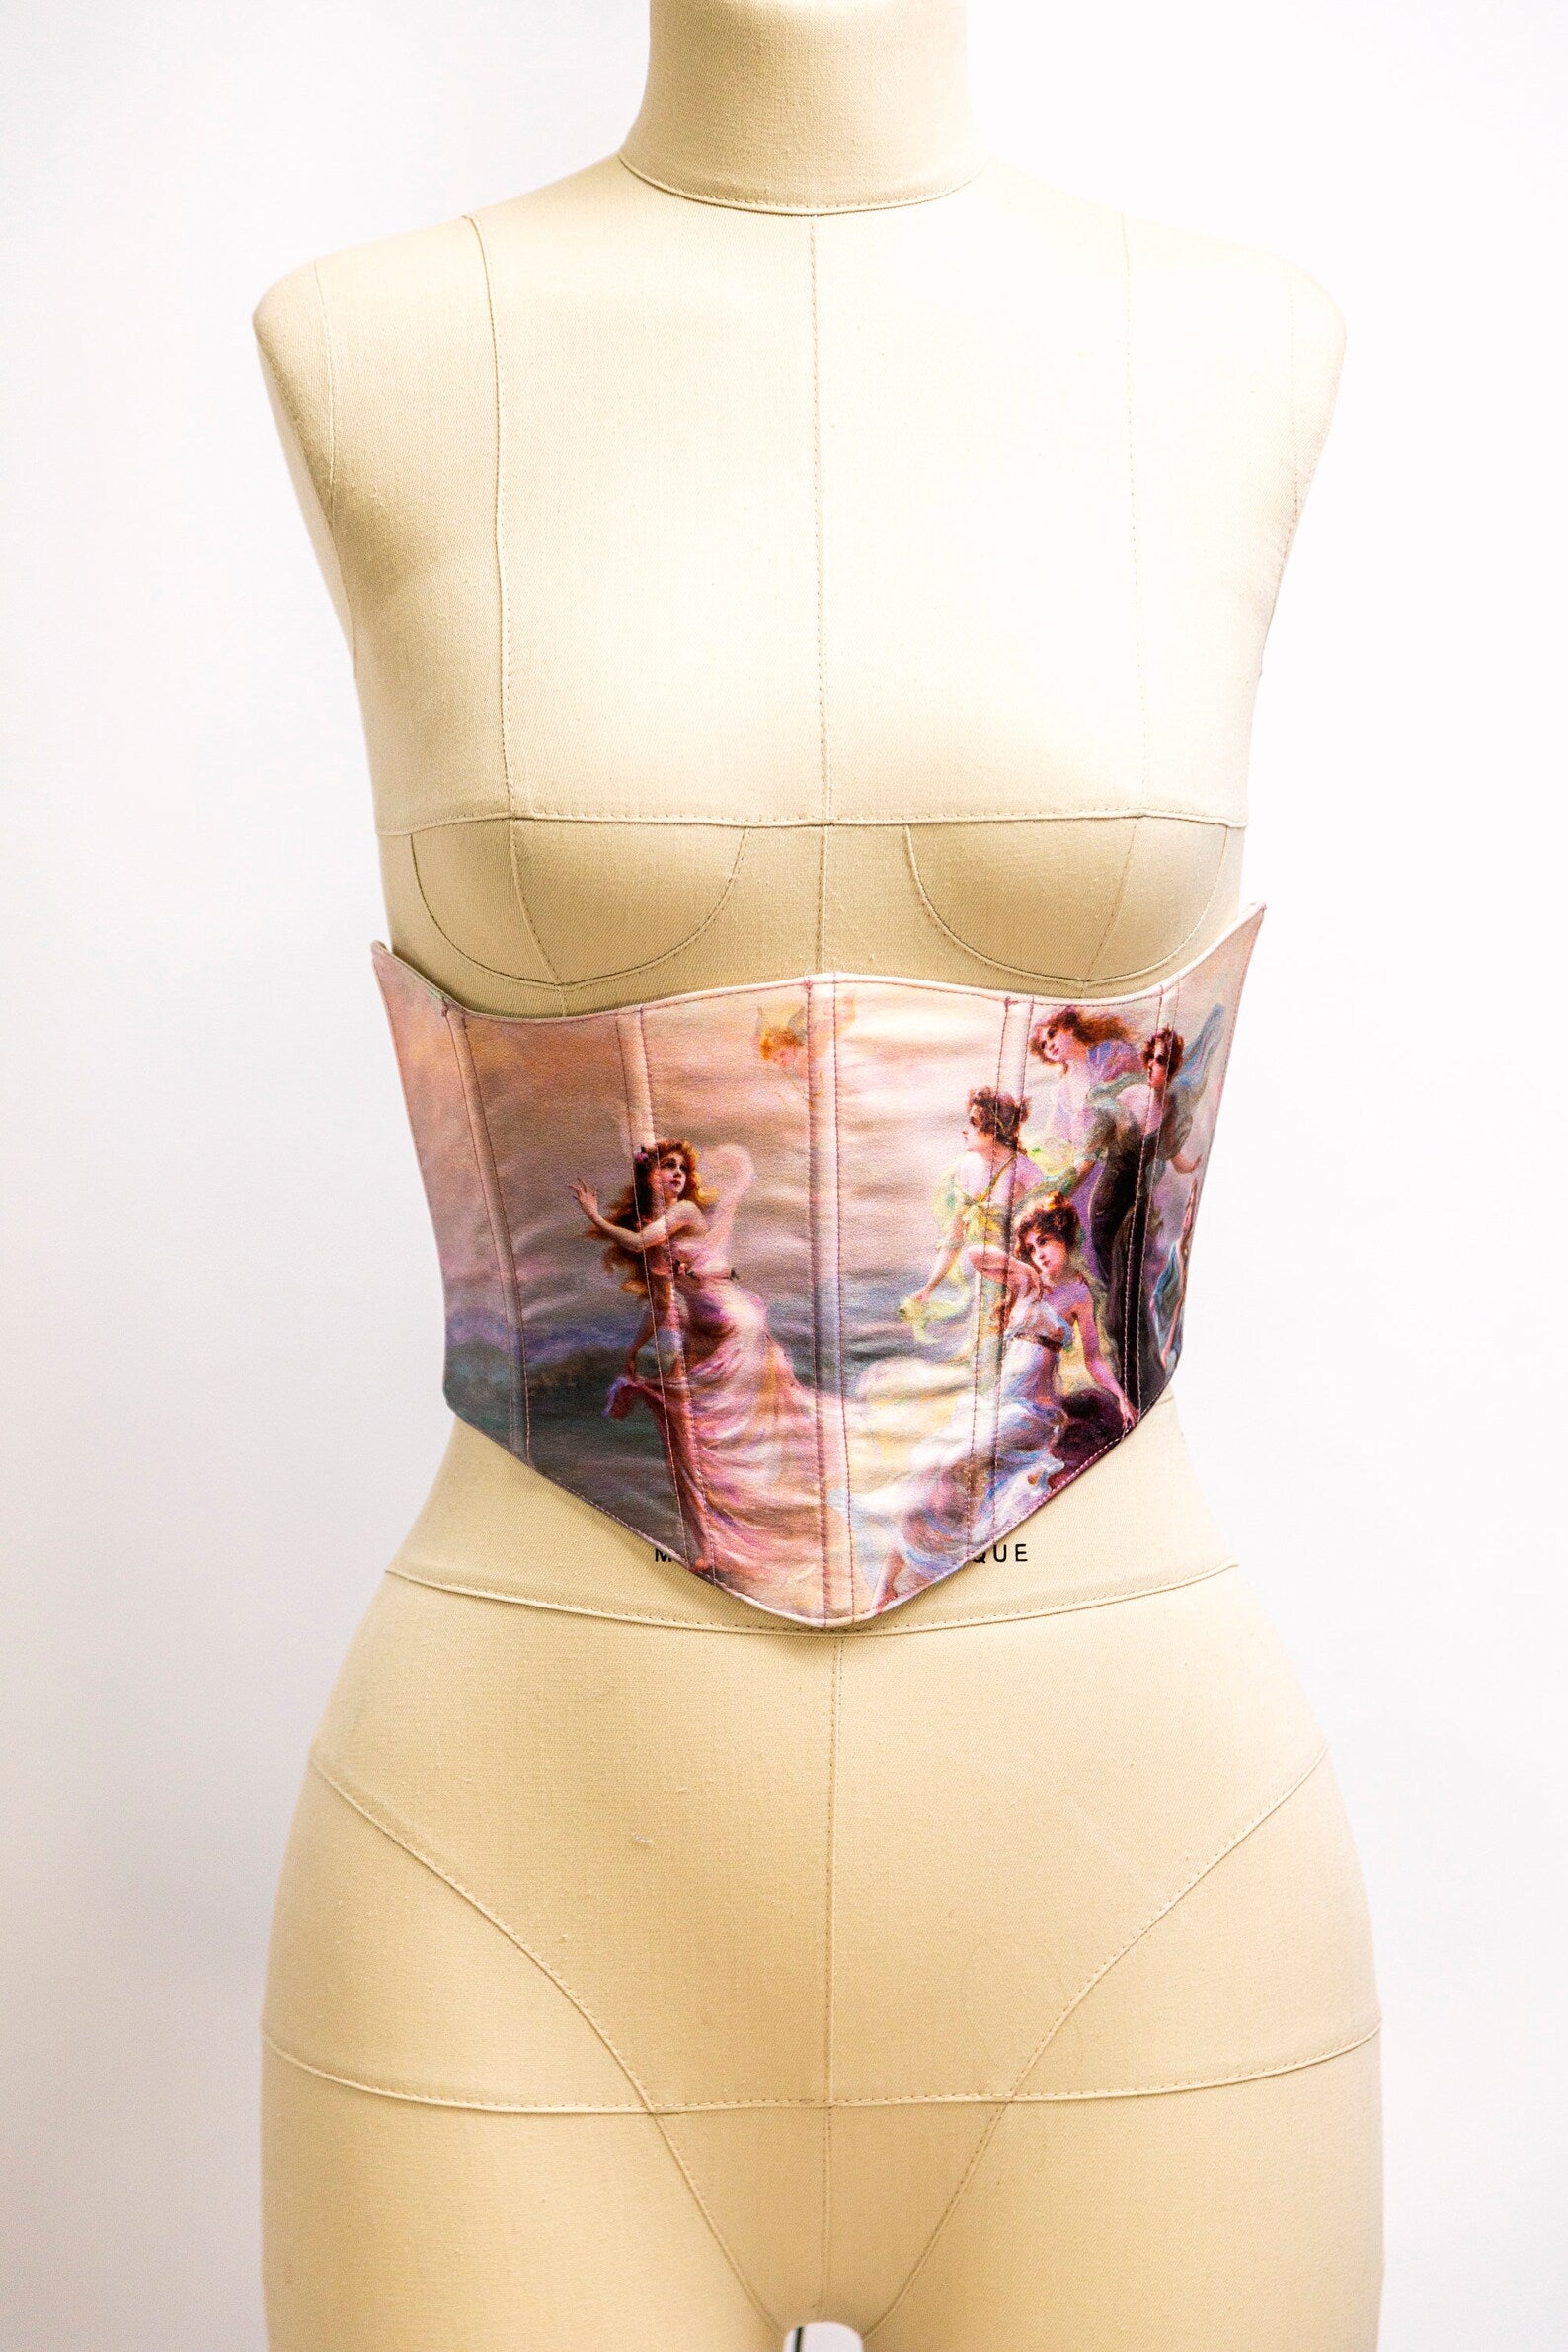 A side view of a pink satin underbust corset with silver hardware and lacing